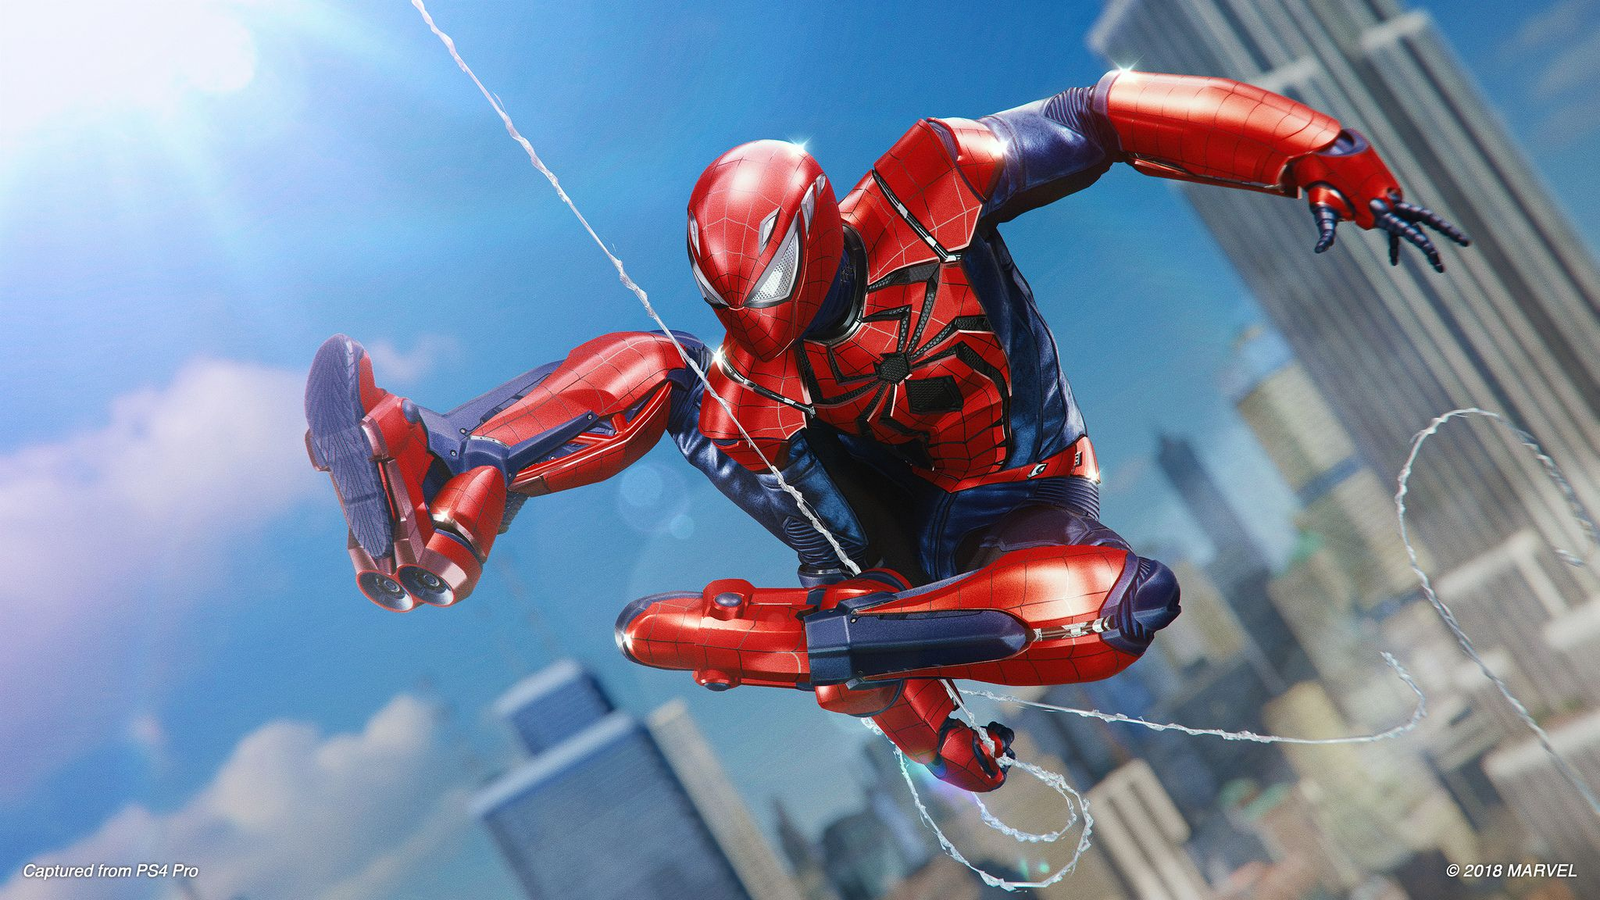 Is Spider-Man Miles Morales BETTER THAN Spider-Man PS4 (2018)? 